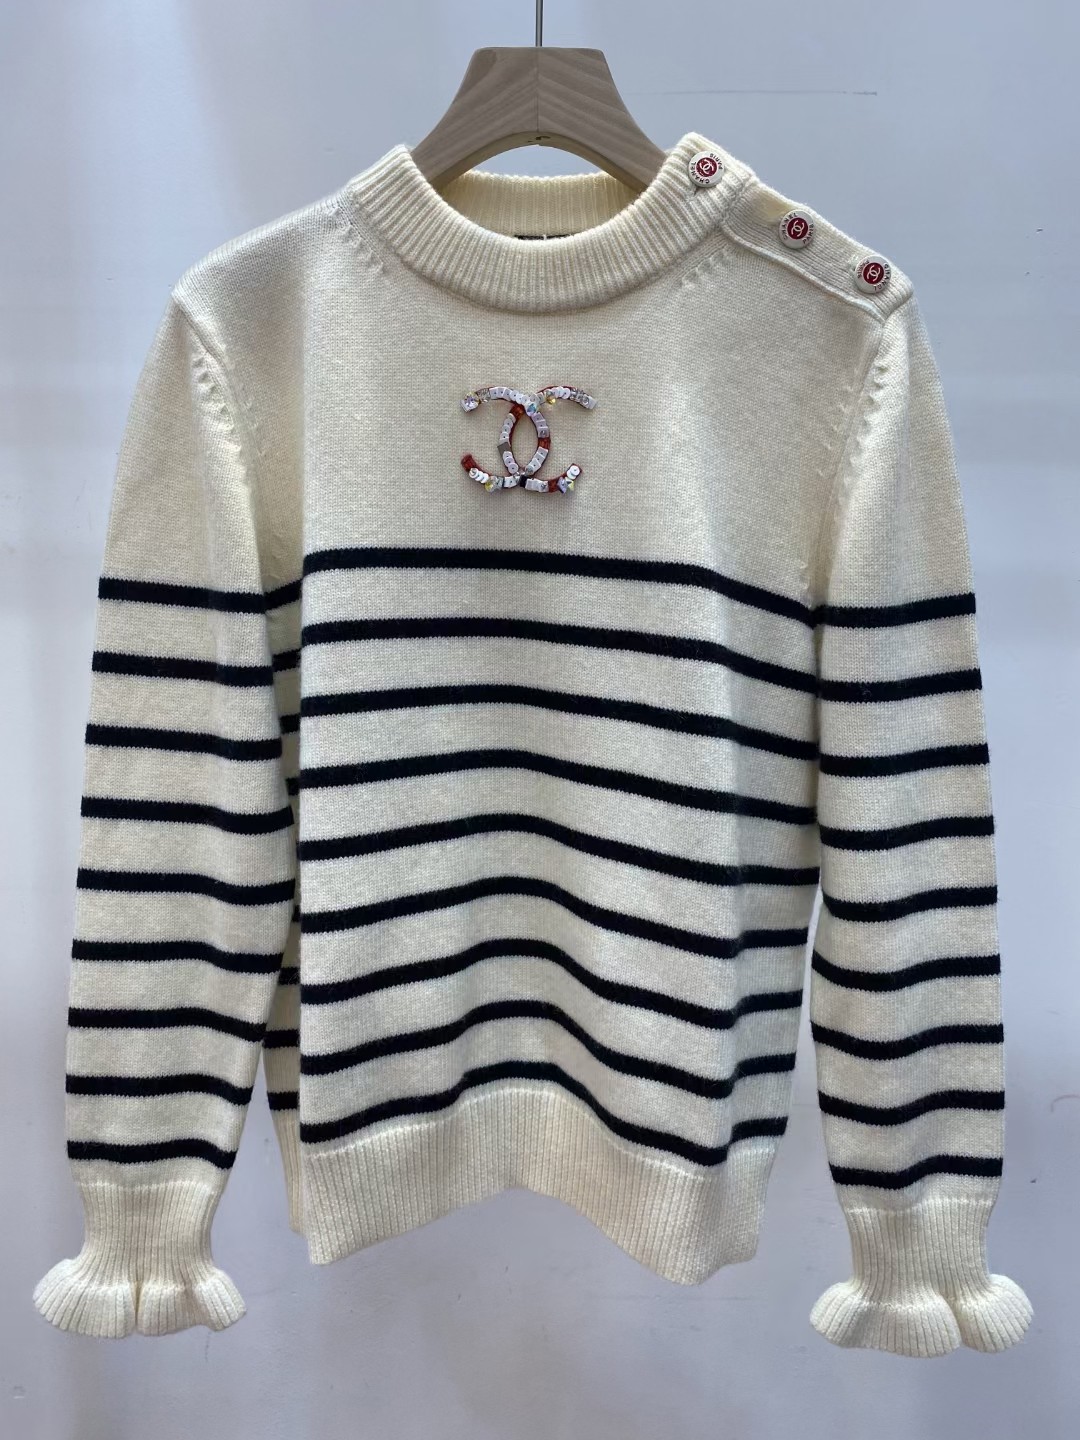 Chanel Clothing Knit Sweater Sweatshirts White Cashmere Knitting Spring Collection